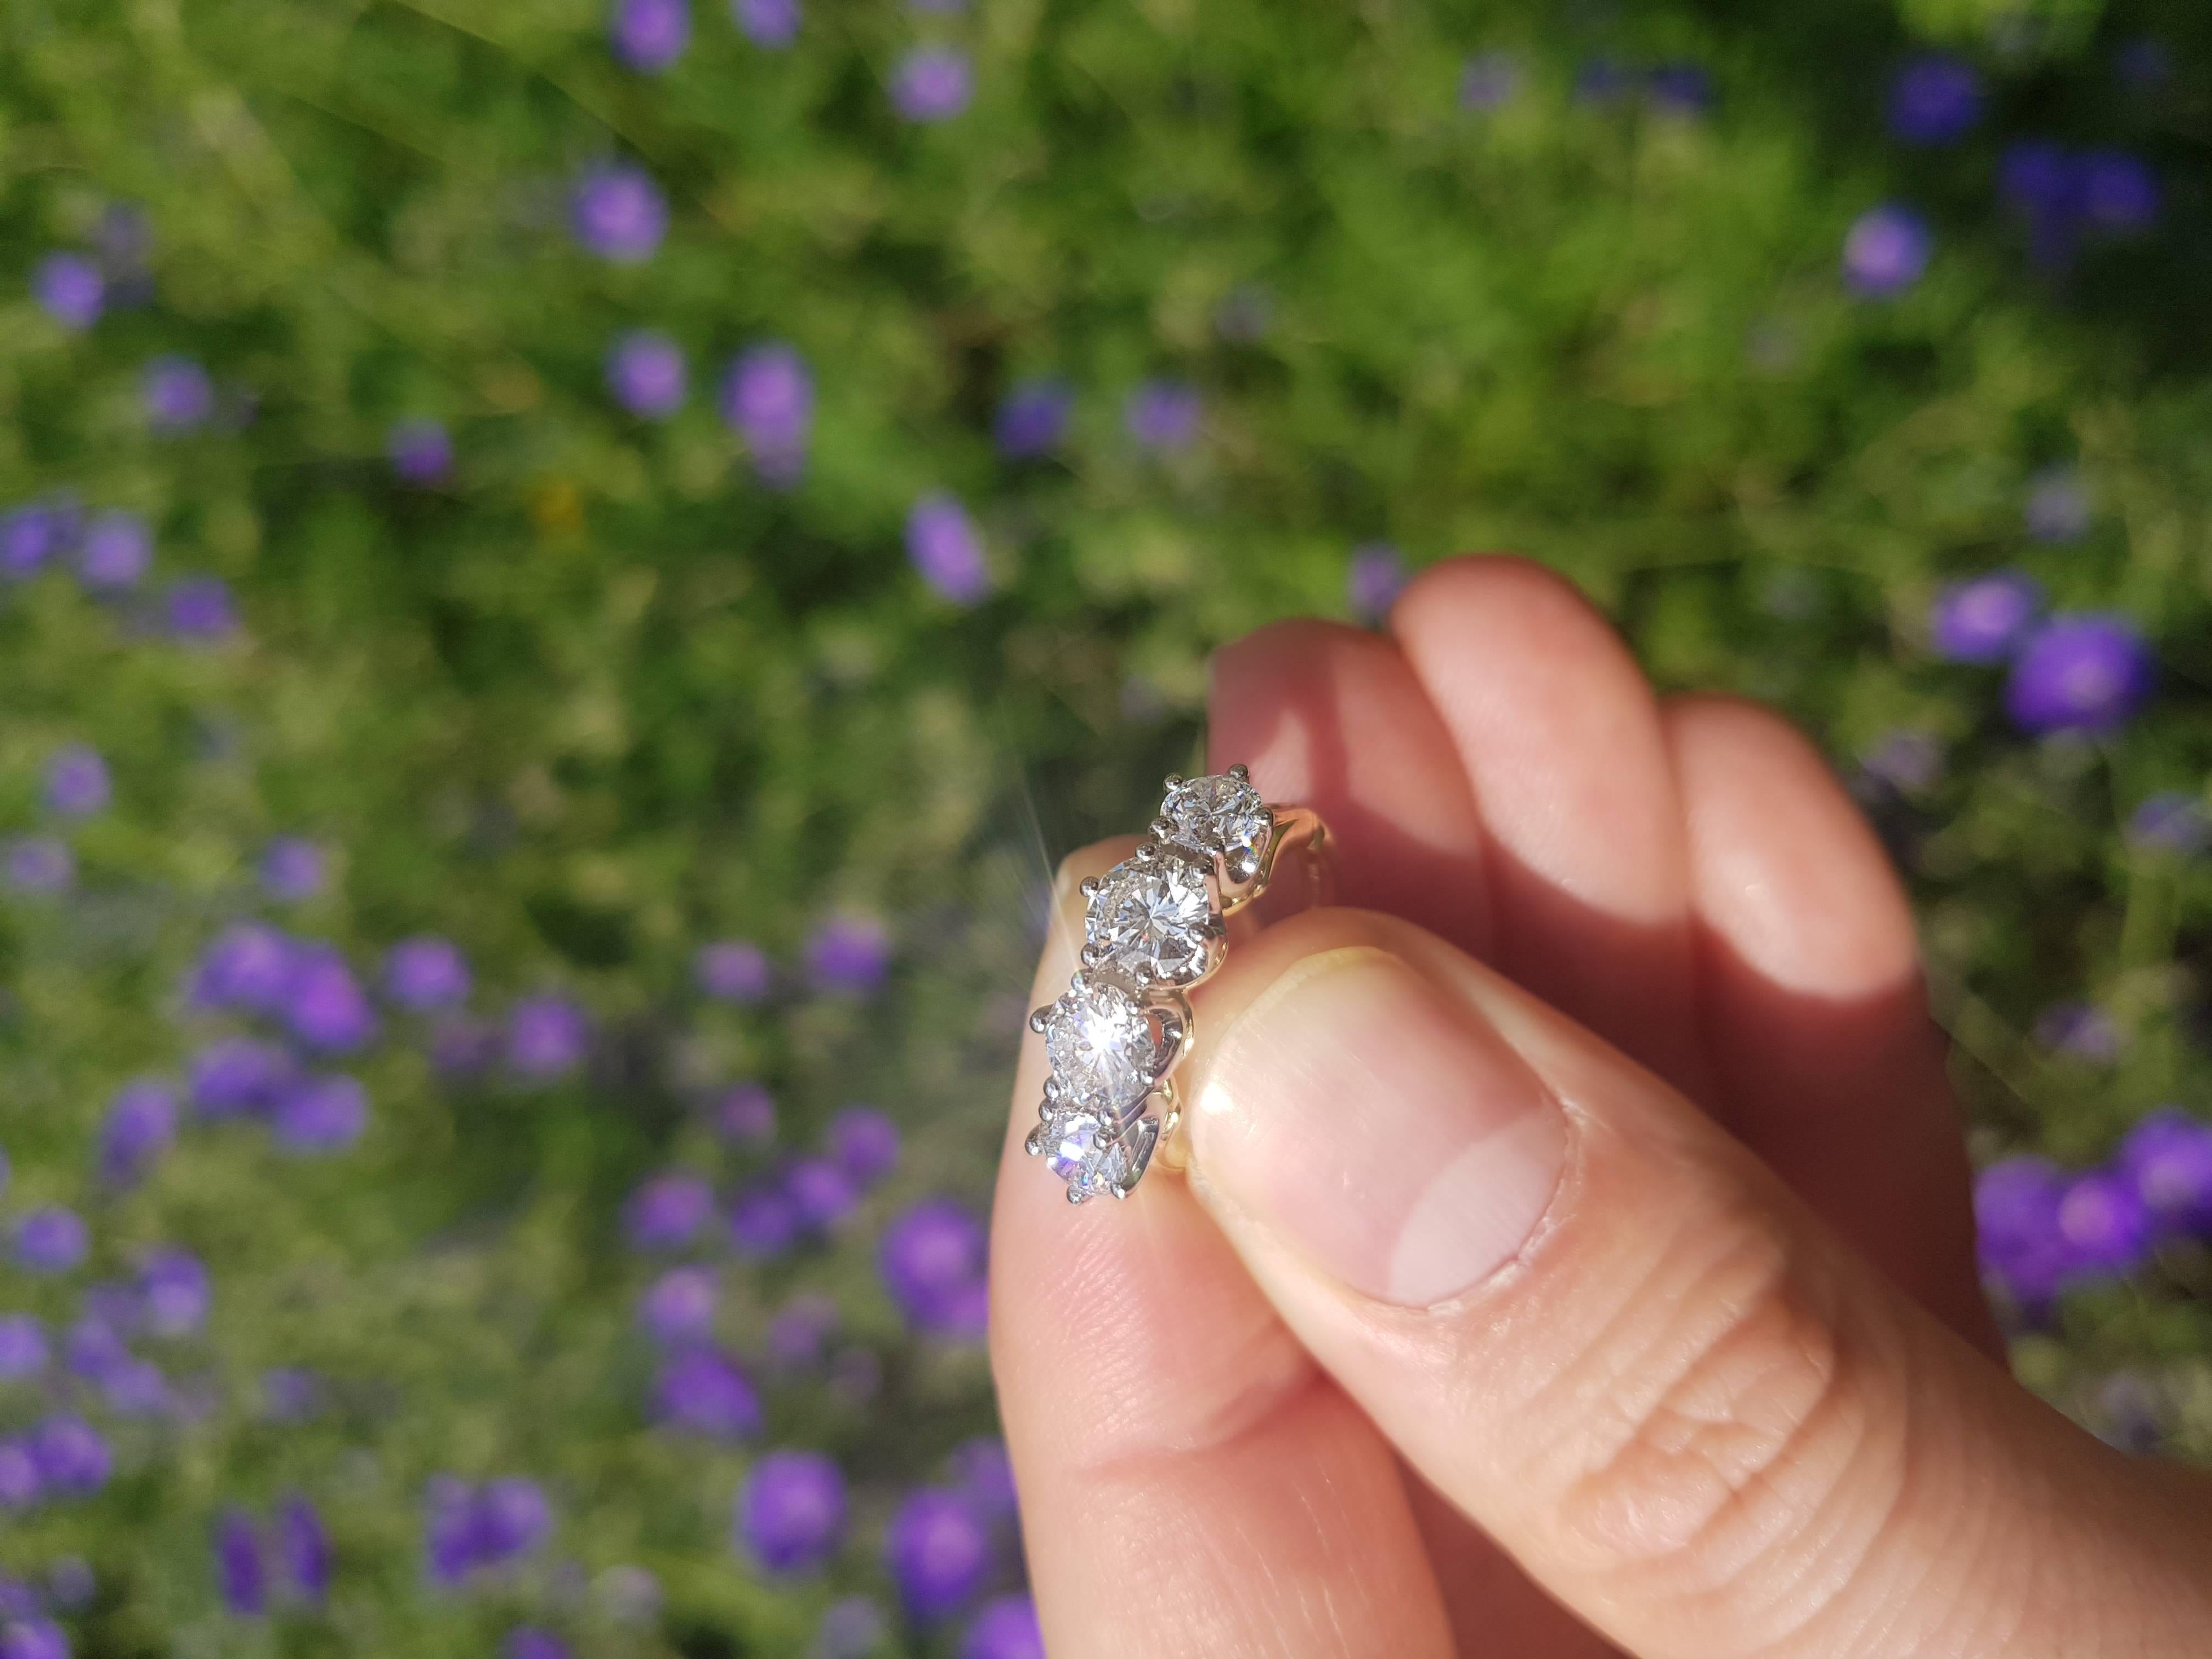 With a unique Victorian style influence, this contemporary, bespoke engagement ring contains 4 round cut, G-colour, GIA certified diamonds, set in 18 carat yellow gold.